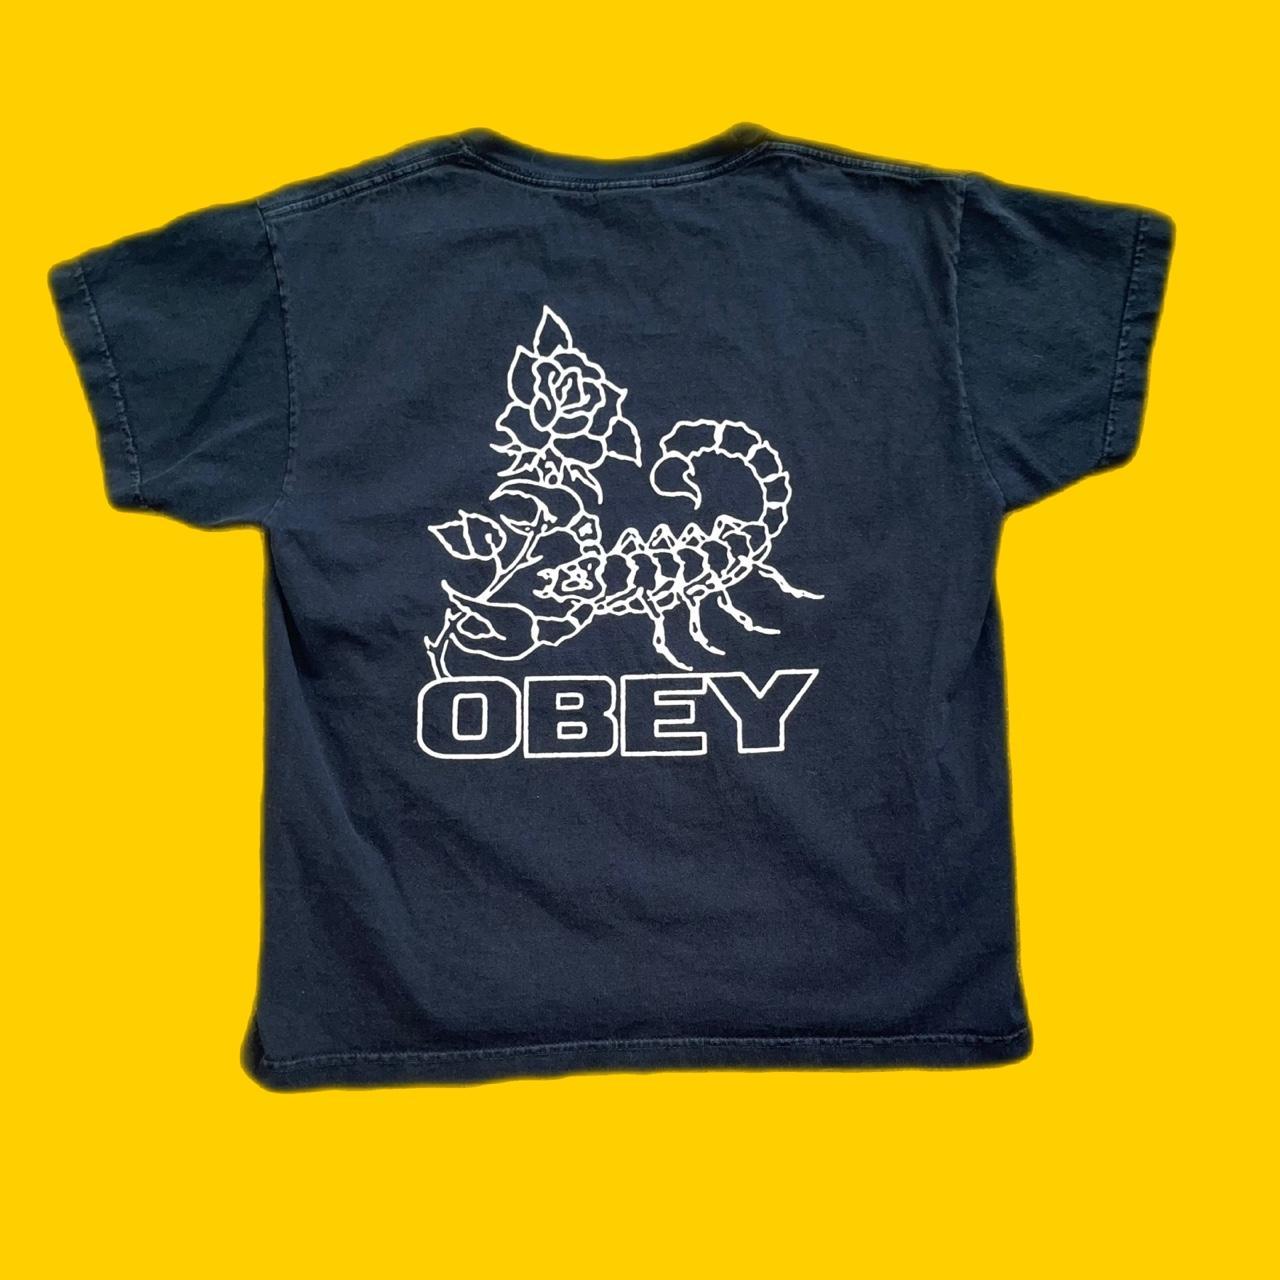 Obey Men's Black and White T-shirt